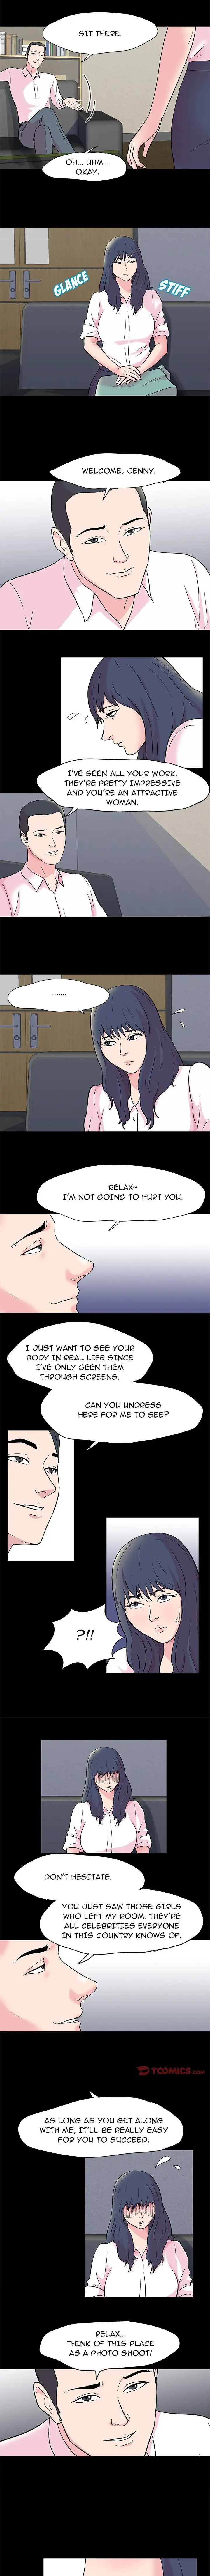 The White Room - Chapter 24 Page 2